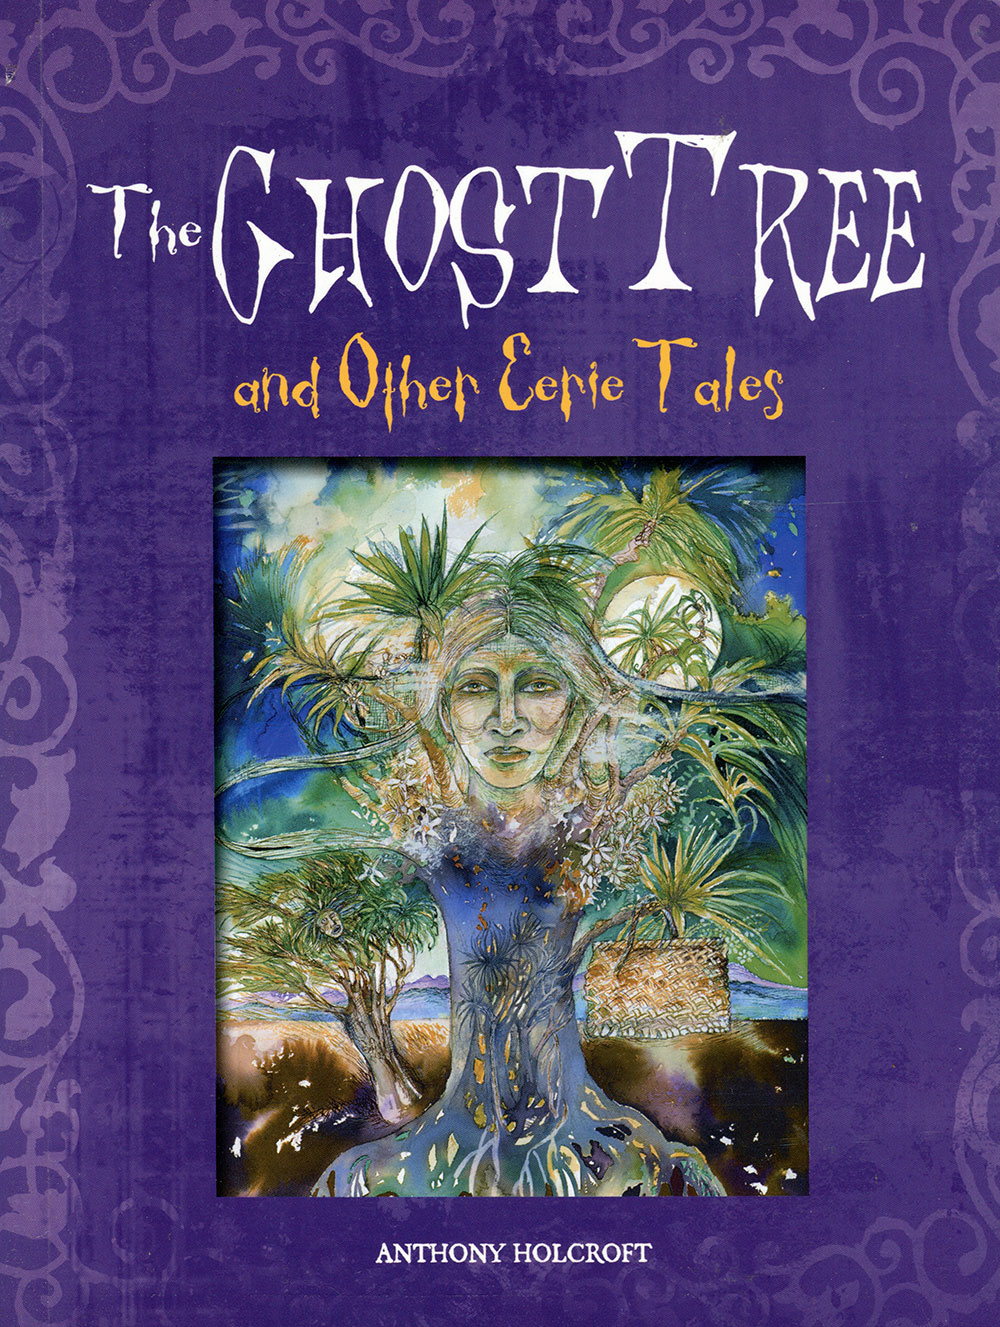 Link to Anthony Holcroft's story collection, The Ghost Tree.